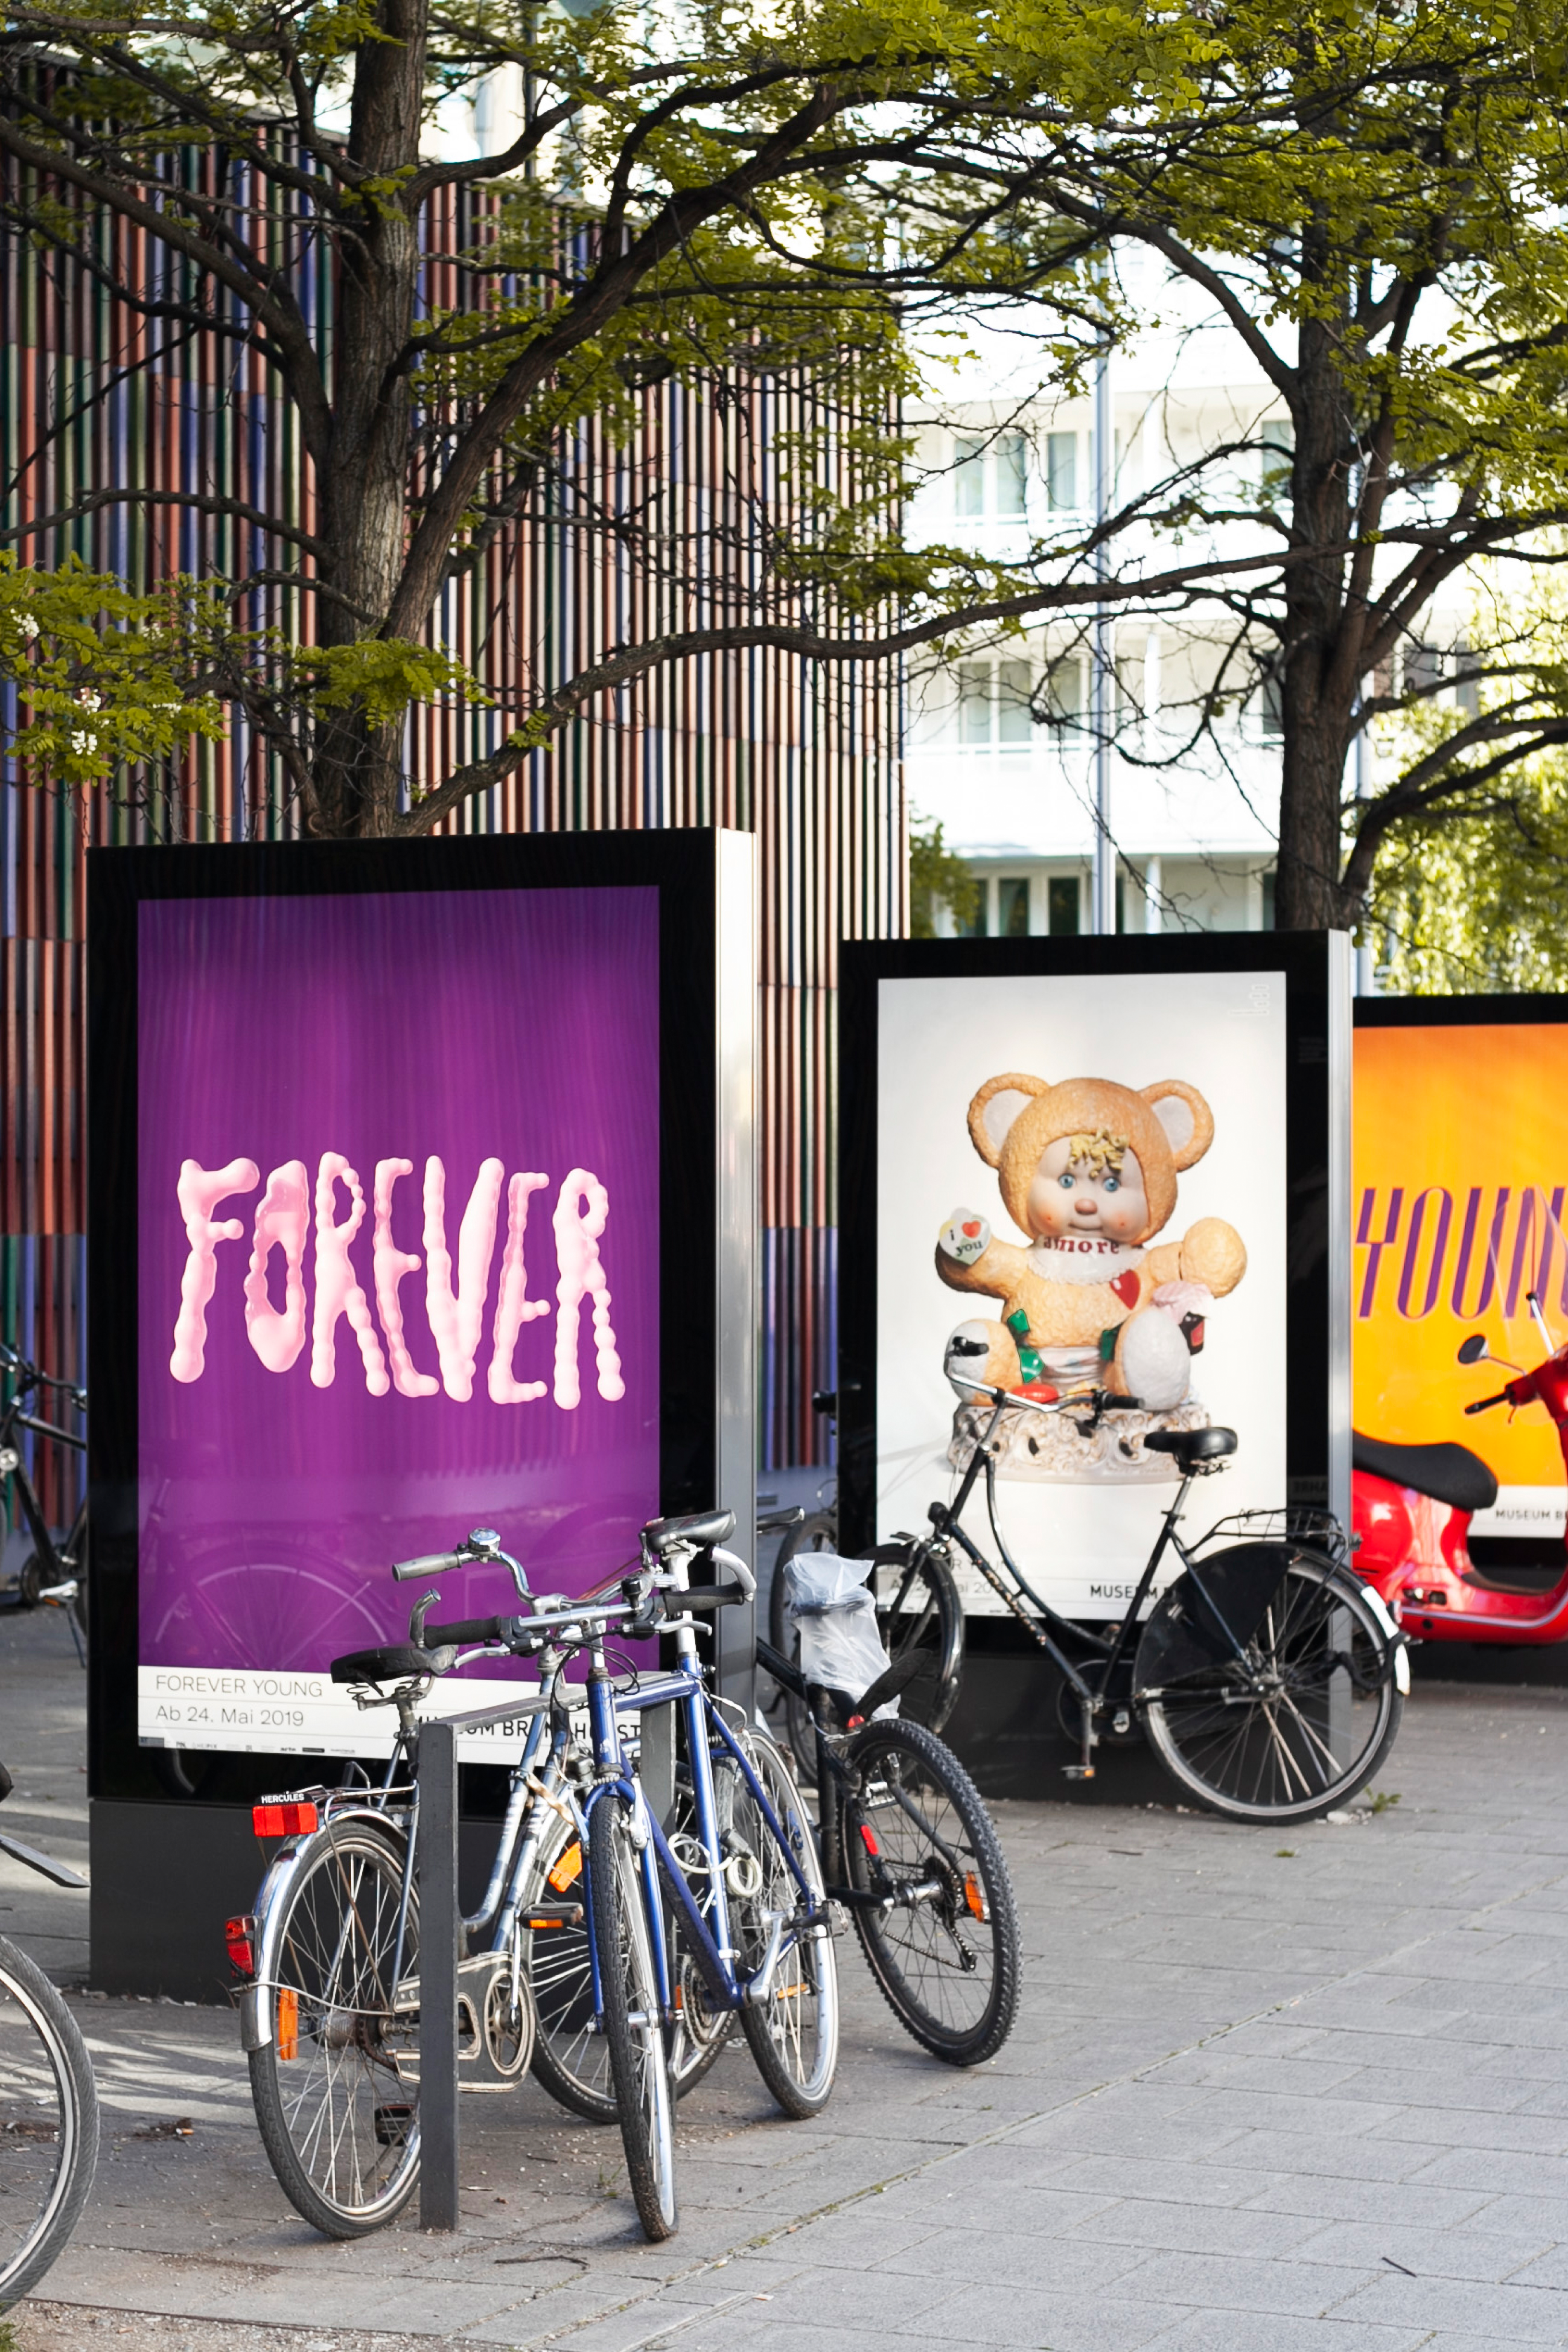 "Forever Young" campaign on city lights at the Museum Brandhorst.